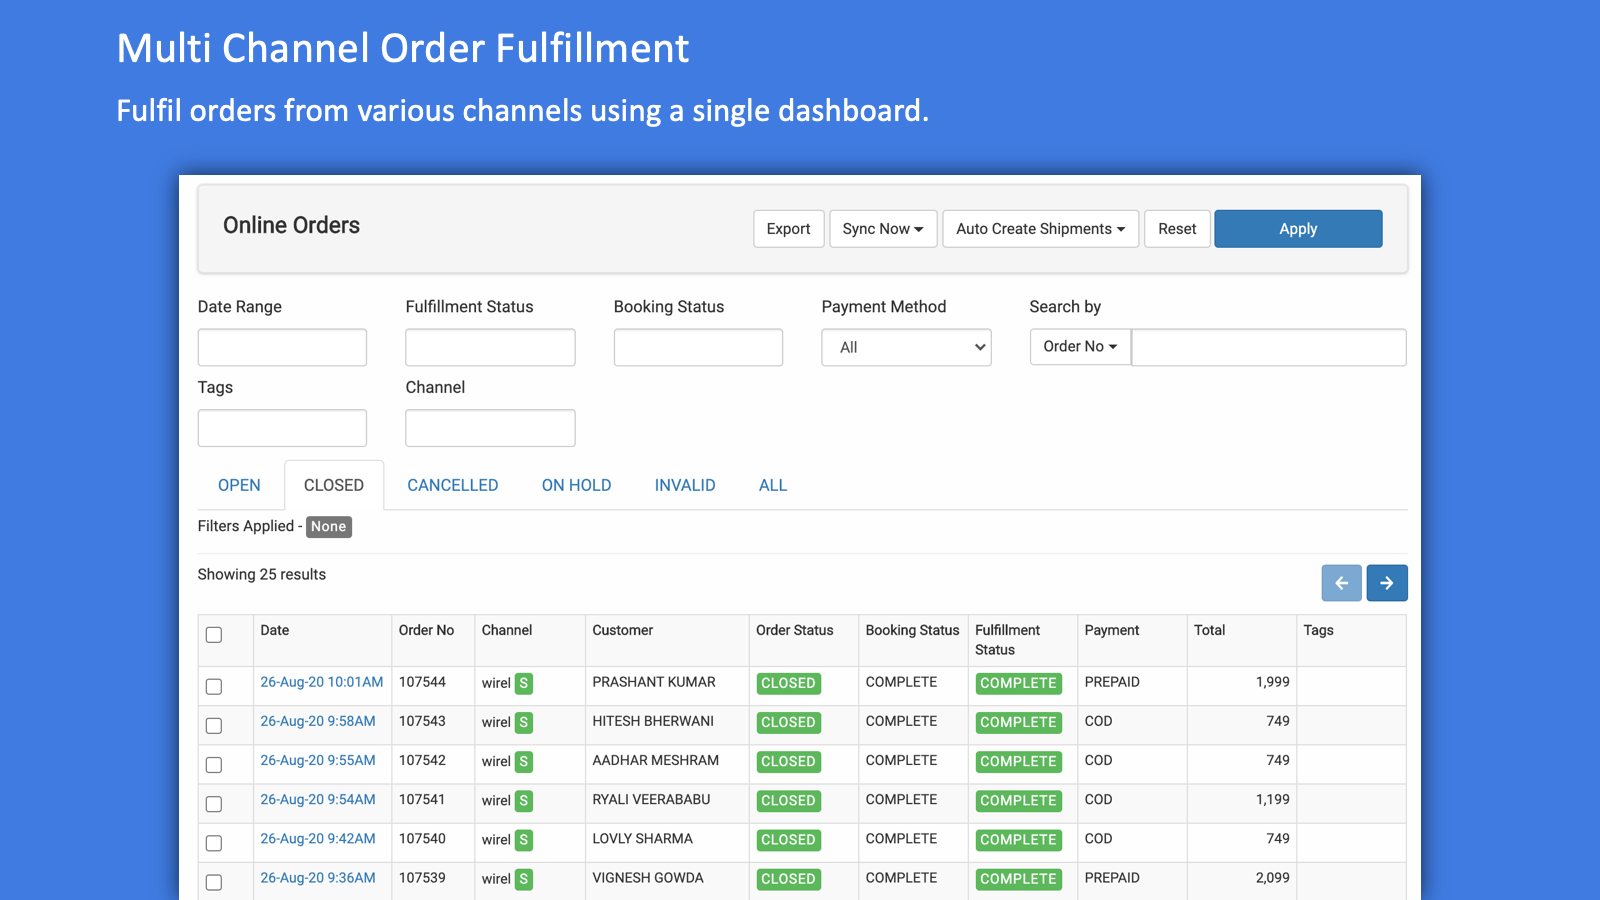 Multi Channel Order Fulfillment. Sumtracker automatically syncs order from online channels. You can fulfill and ship orders from Sumtracker directly.